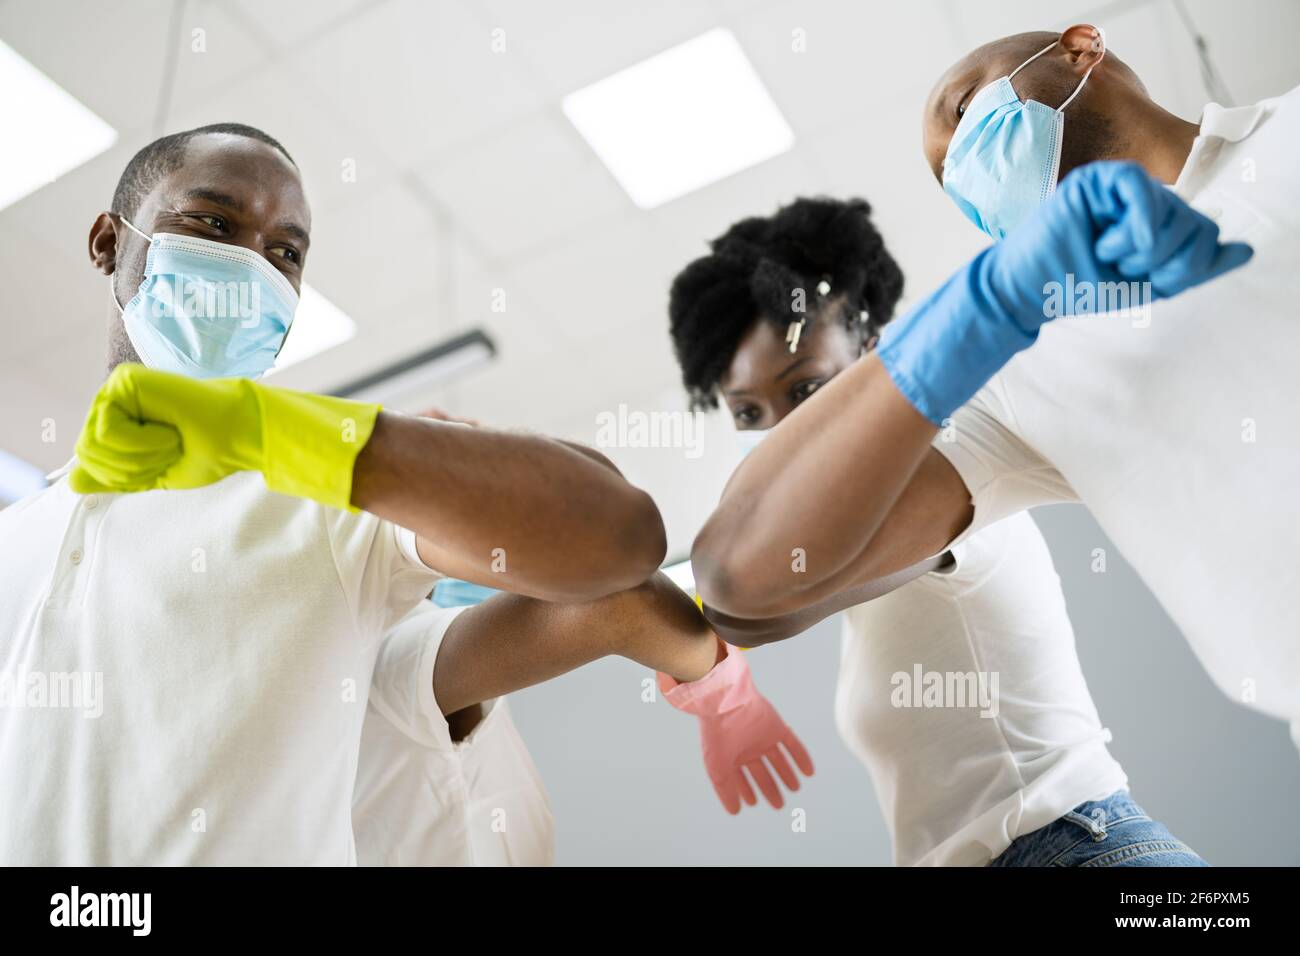 Janitor Cleaner Team In Uniform Elbow Bump Stock Photo